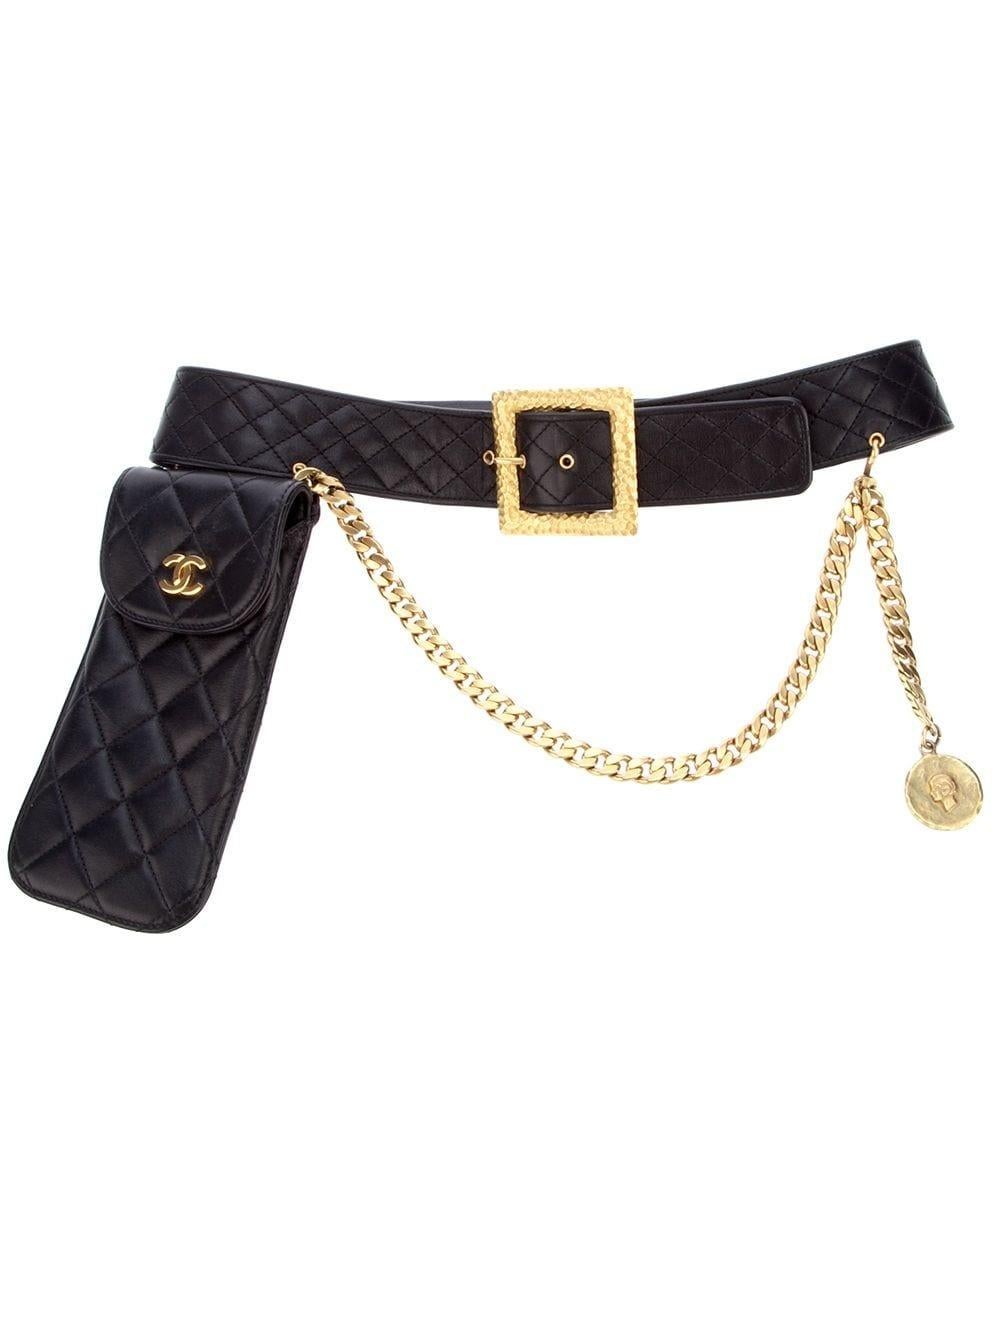 Chanel 1994 Spring Runway Rare Vintage Limited Edition Waist Belt Bum Bag In Good Condition For Sale In Miami, FL